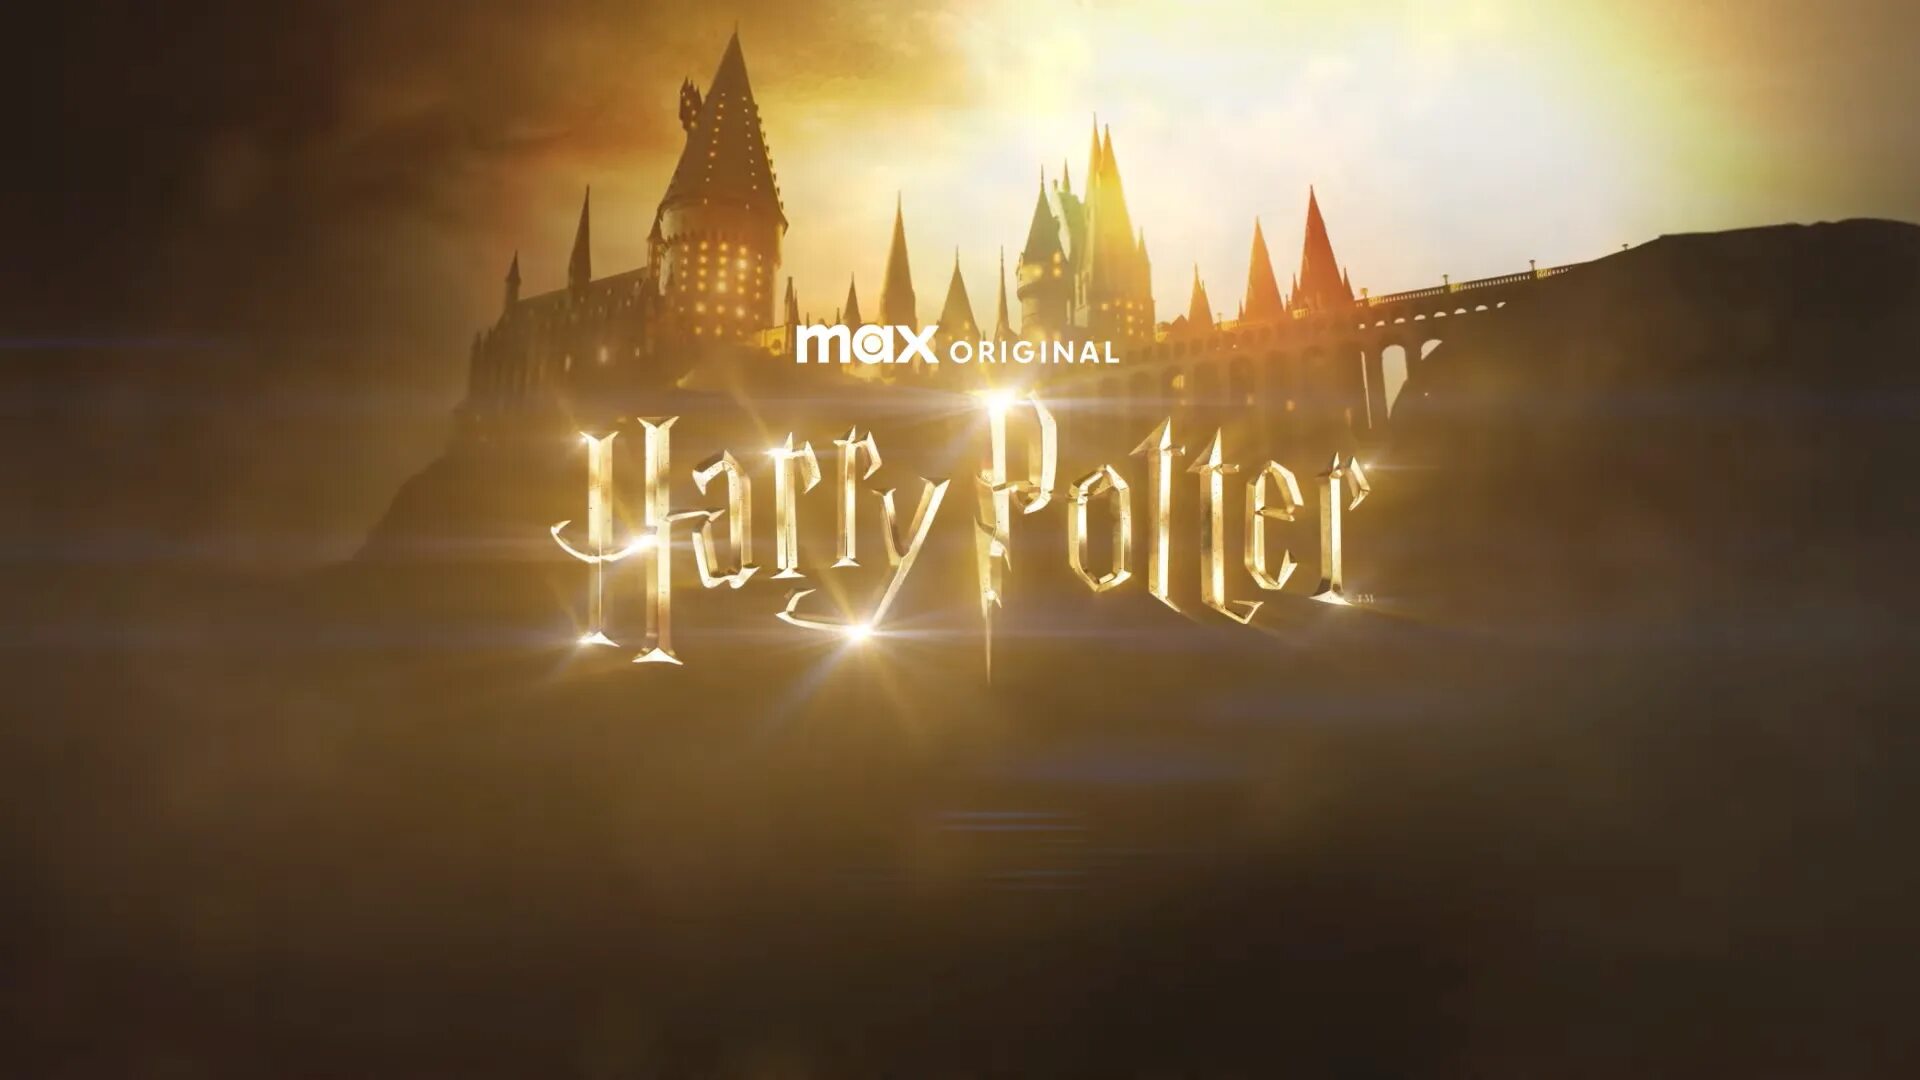 Harry Potter HBO. Harry potter is a series